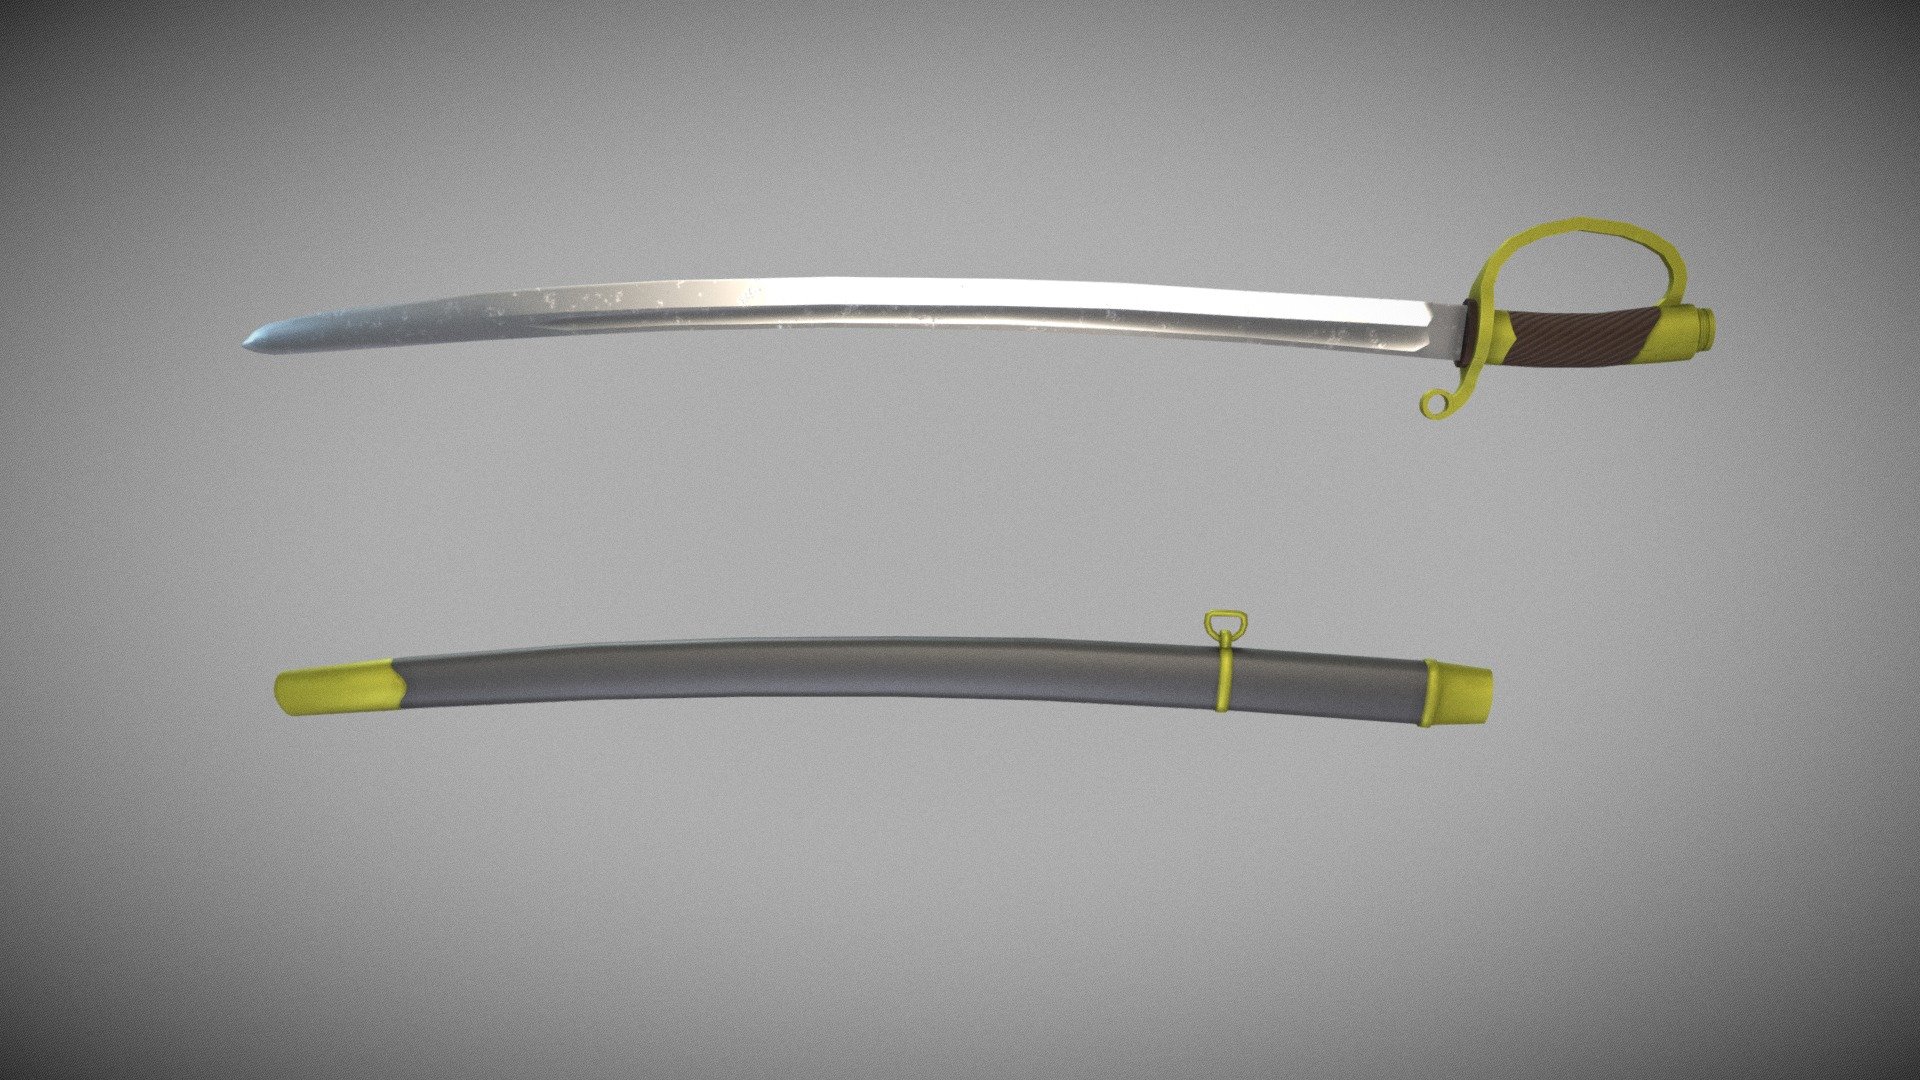 simple model of a Russian shashka saber sample 1881,
my second model ever that i took seriously - Russian soldier Shashka saber sample 1881 - Download Free 3D model by mykelas 3d model